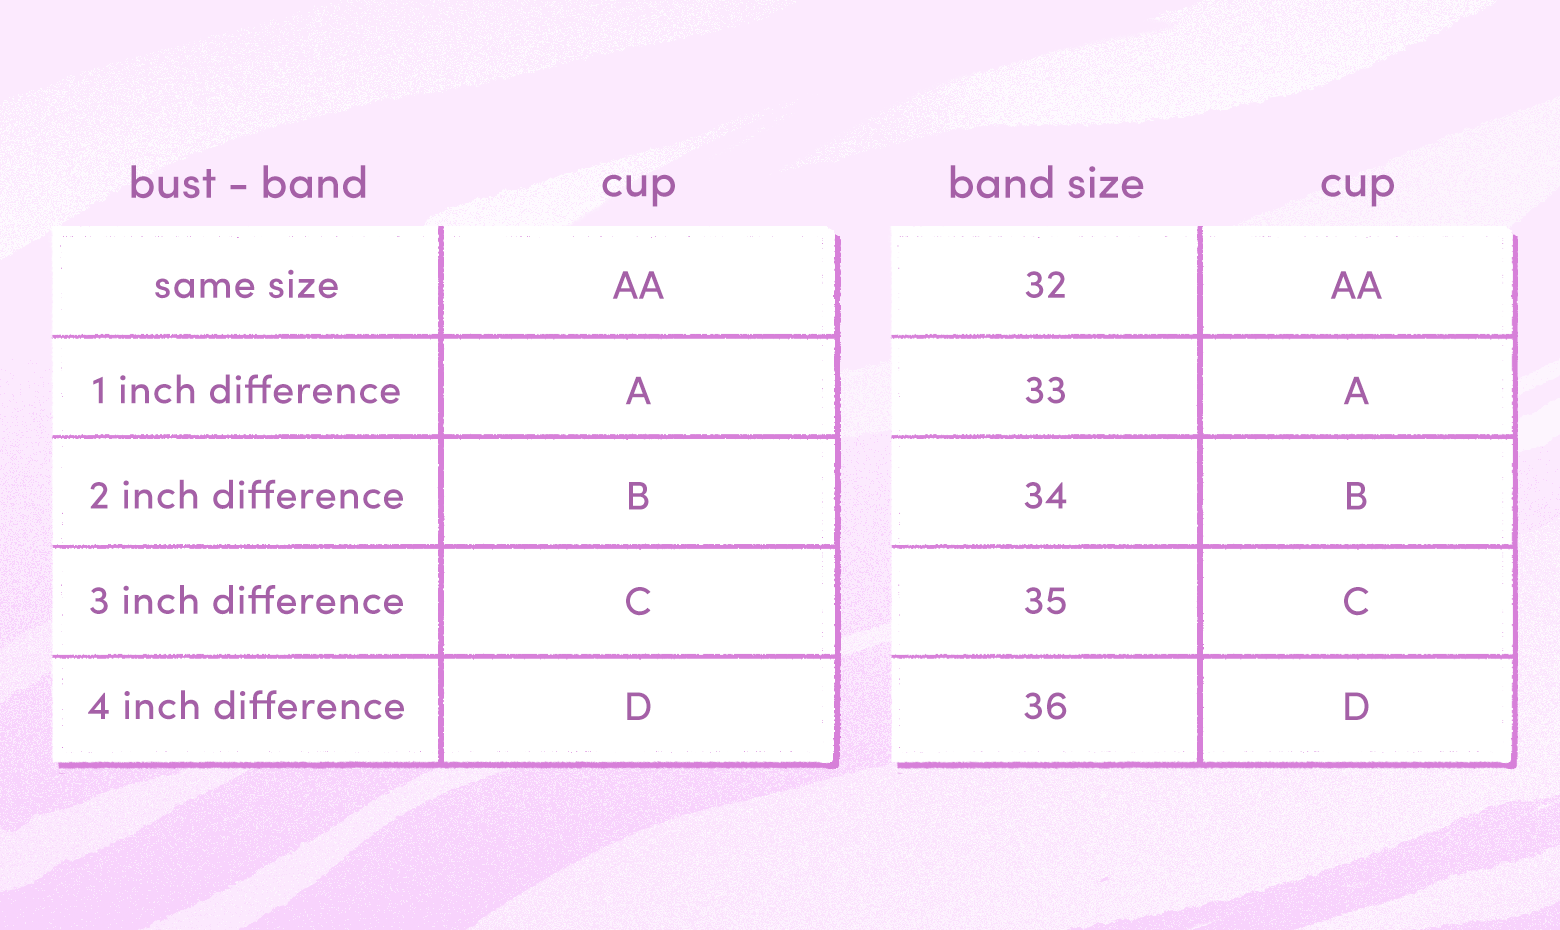 The cup size of a bra is determined by the difference - Band to